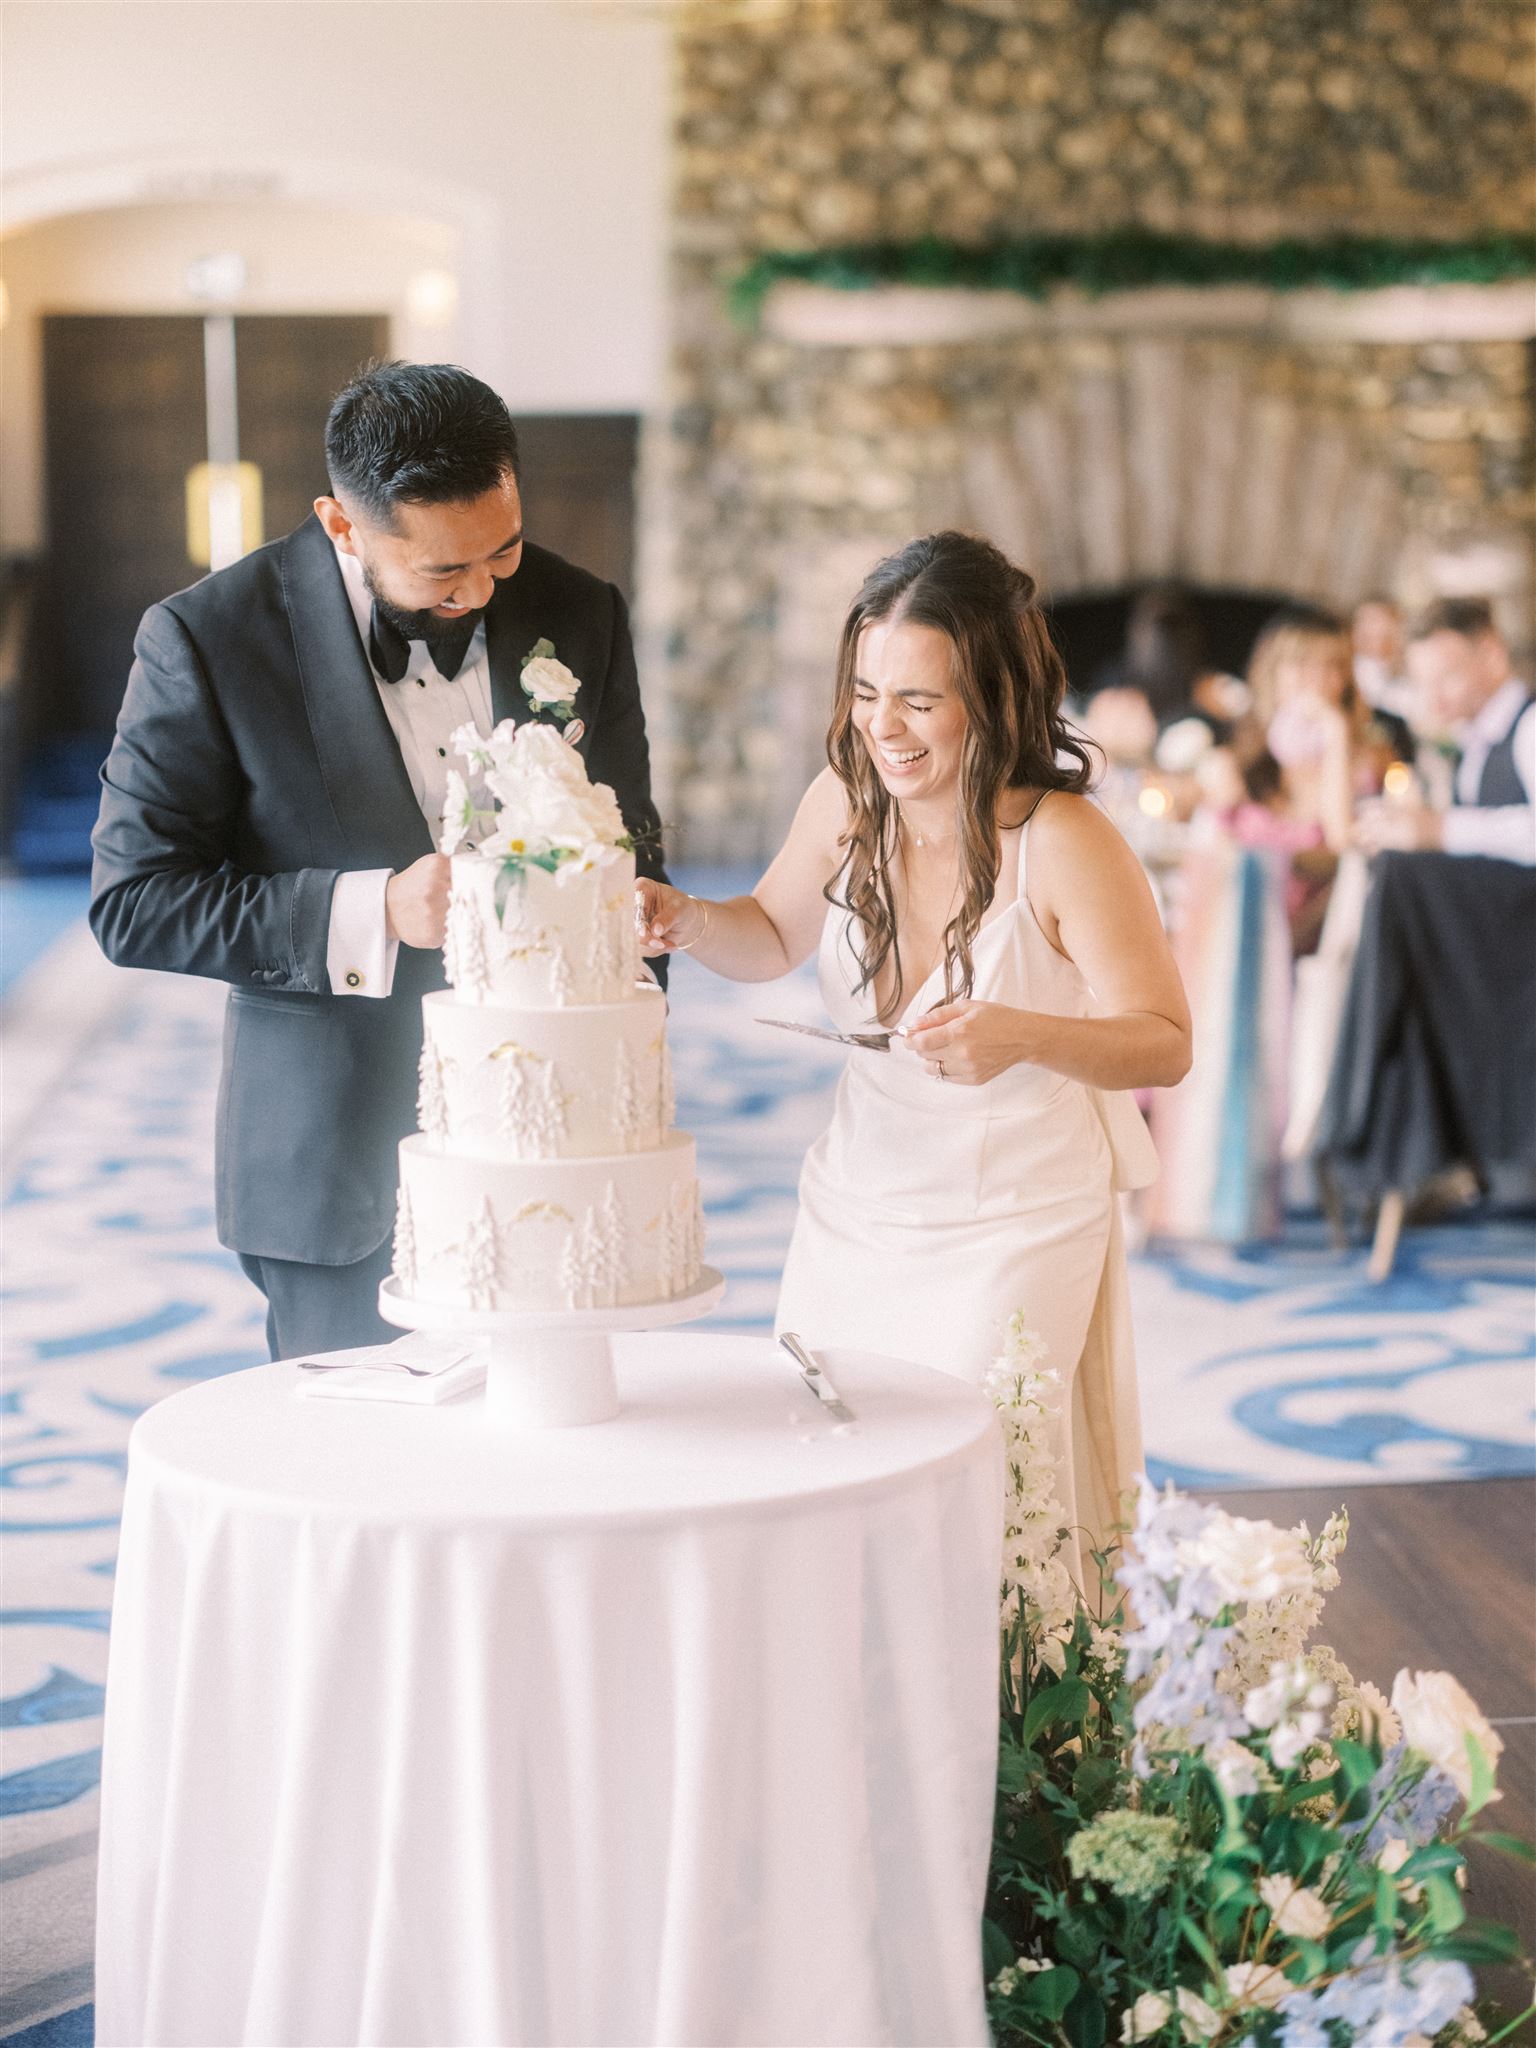 Best tips for candid wedding photos, couple cutting wedding cake, couple laughing cutting wedding cake